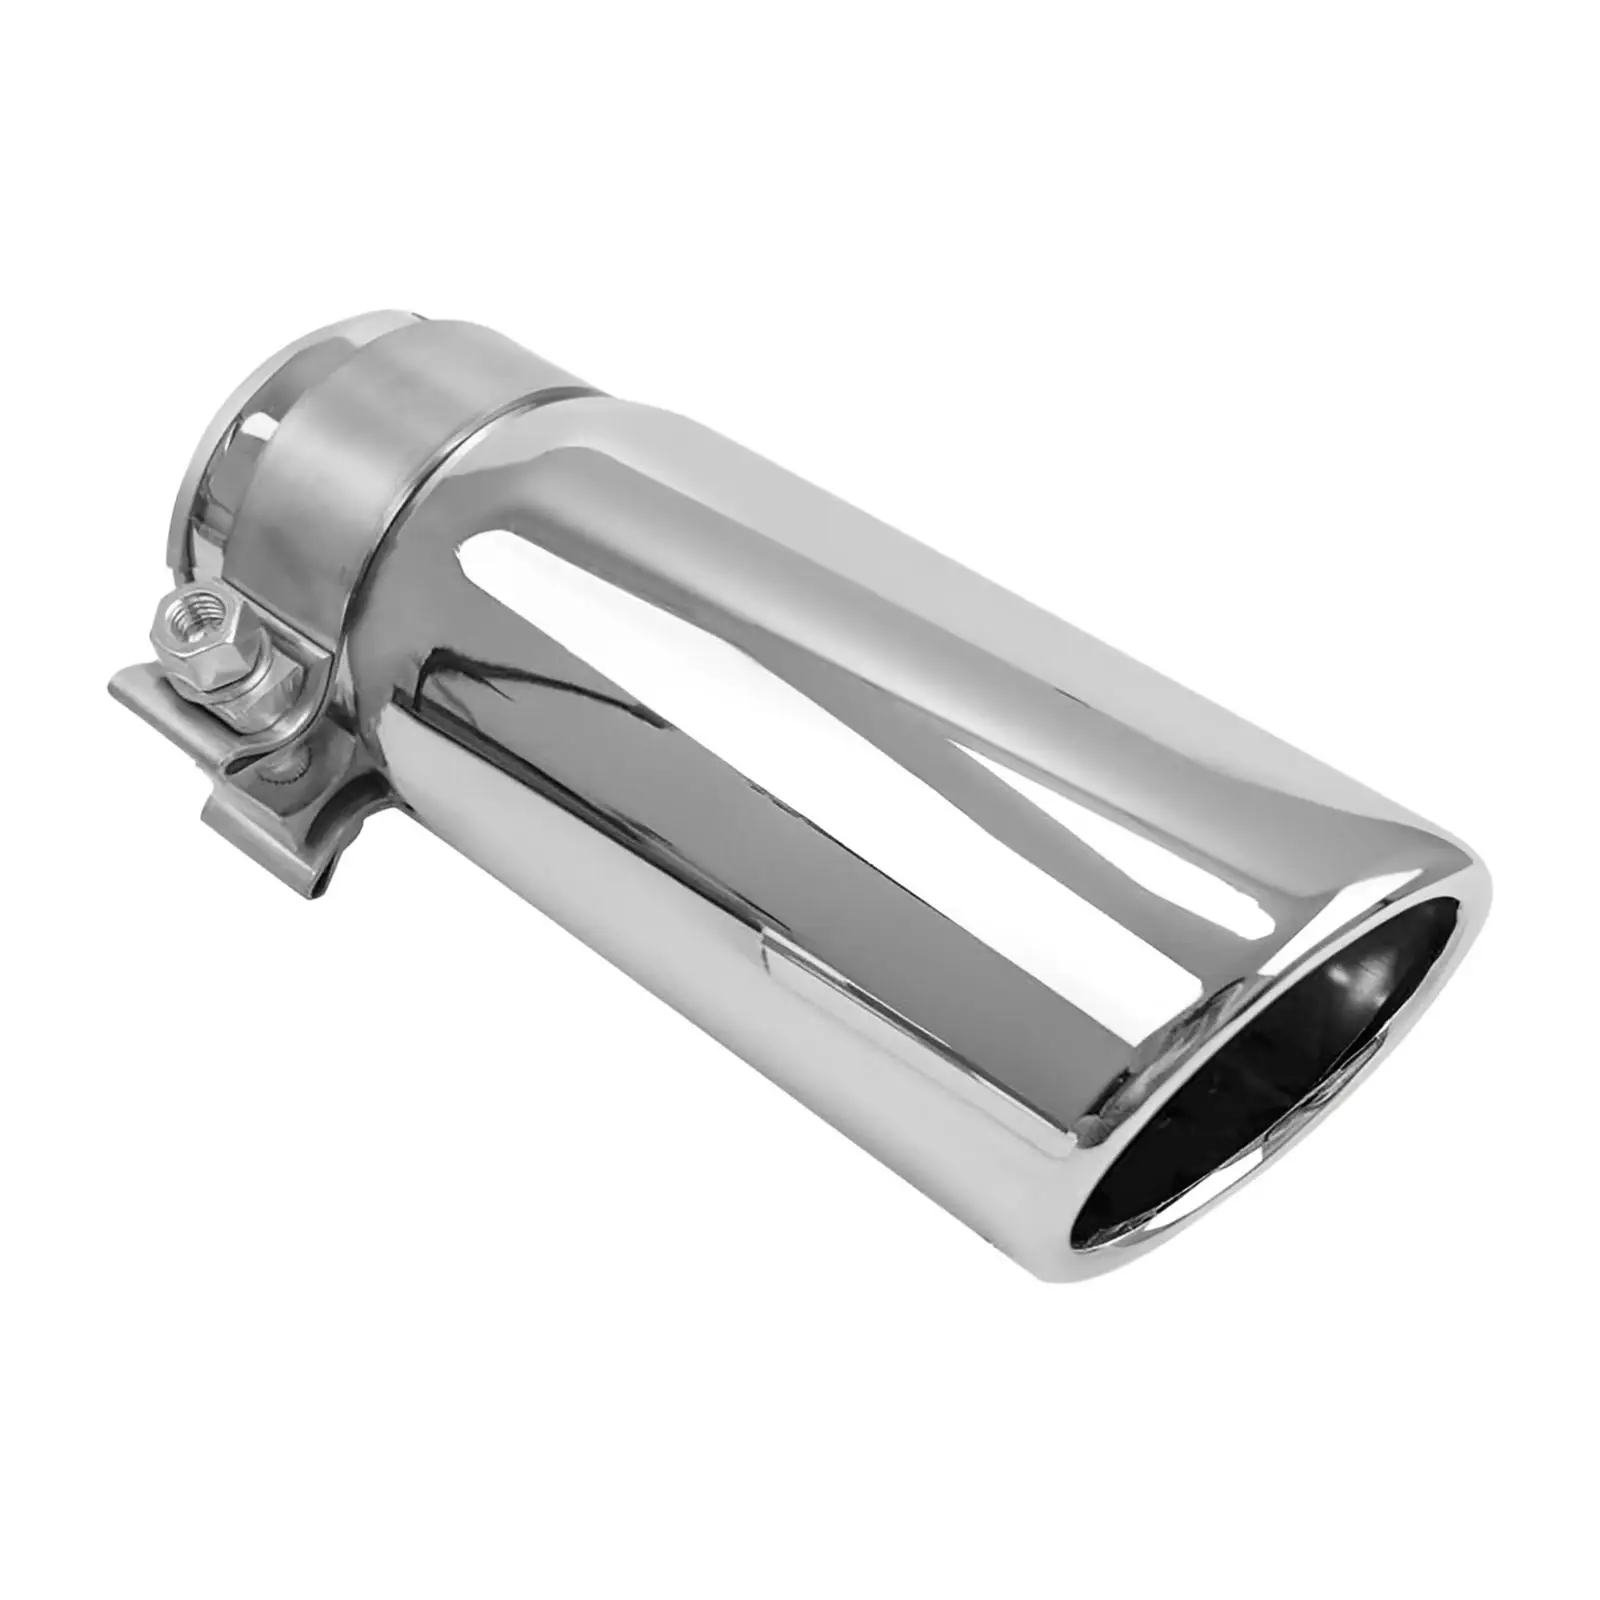 Stainless Steel Exhaust Tip PT932-35180-02 Exhaust  Tail 005-21 Accessories Replacement Premium Car